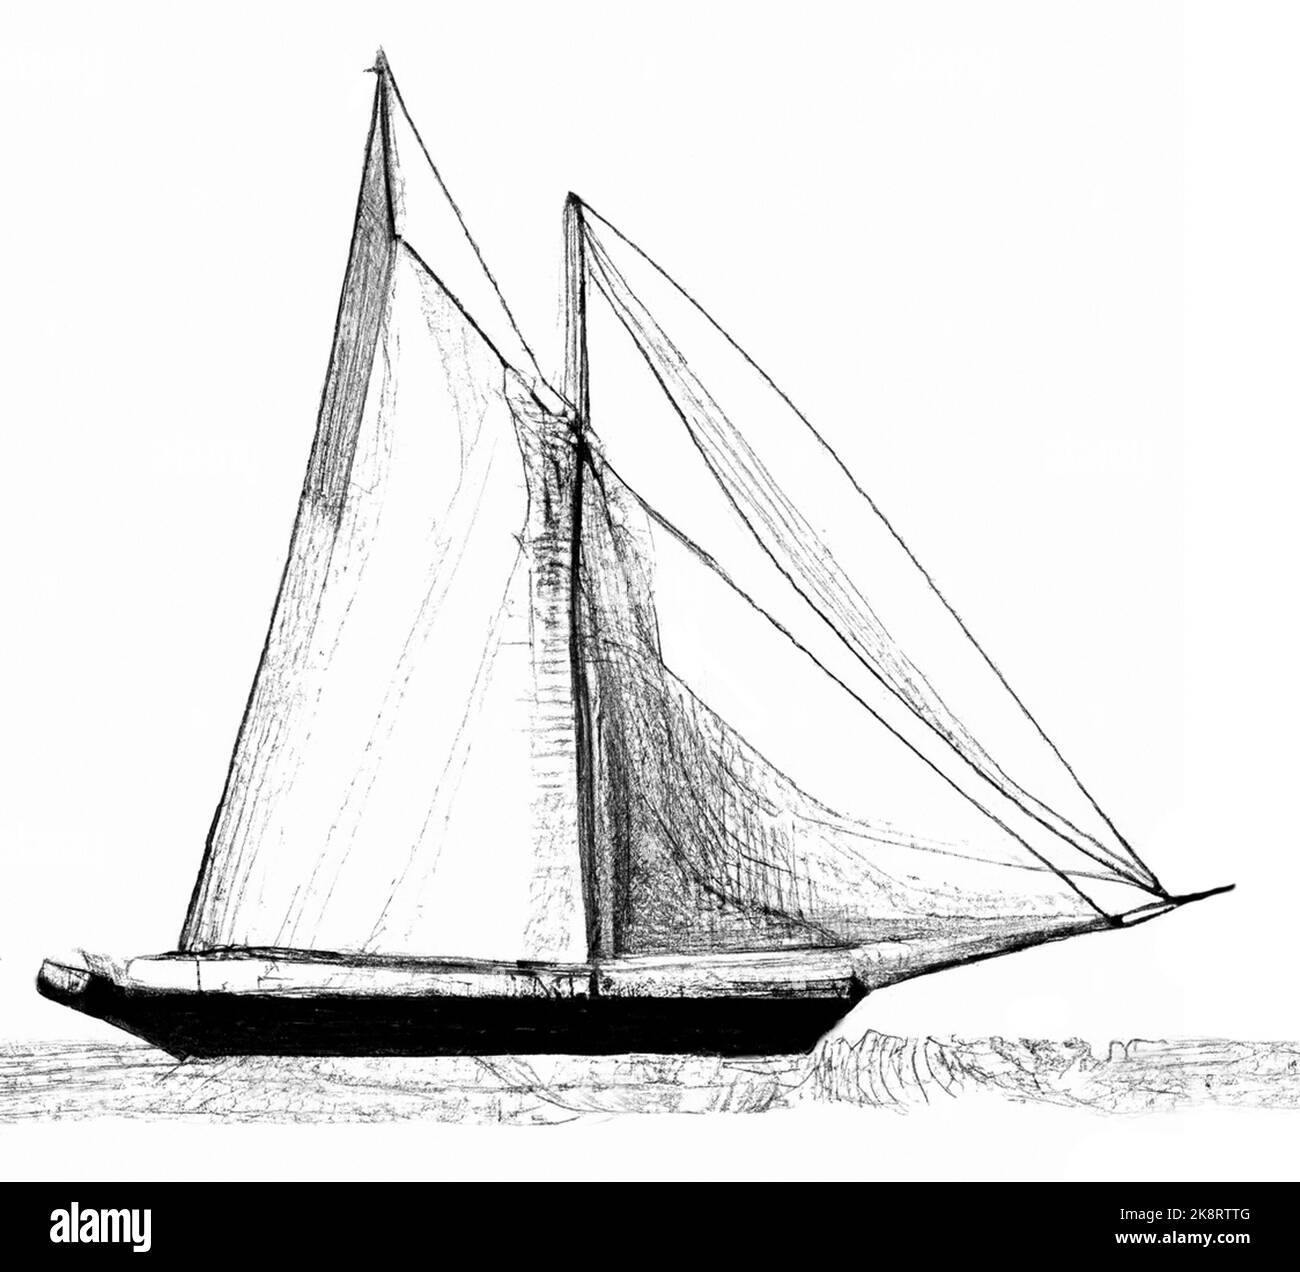 Sailboat line drawing original art work. Black and white scooner or cutter with two masts. Stock Photo